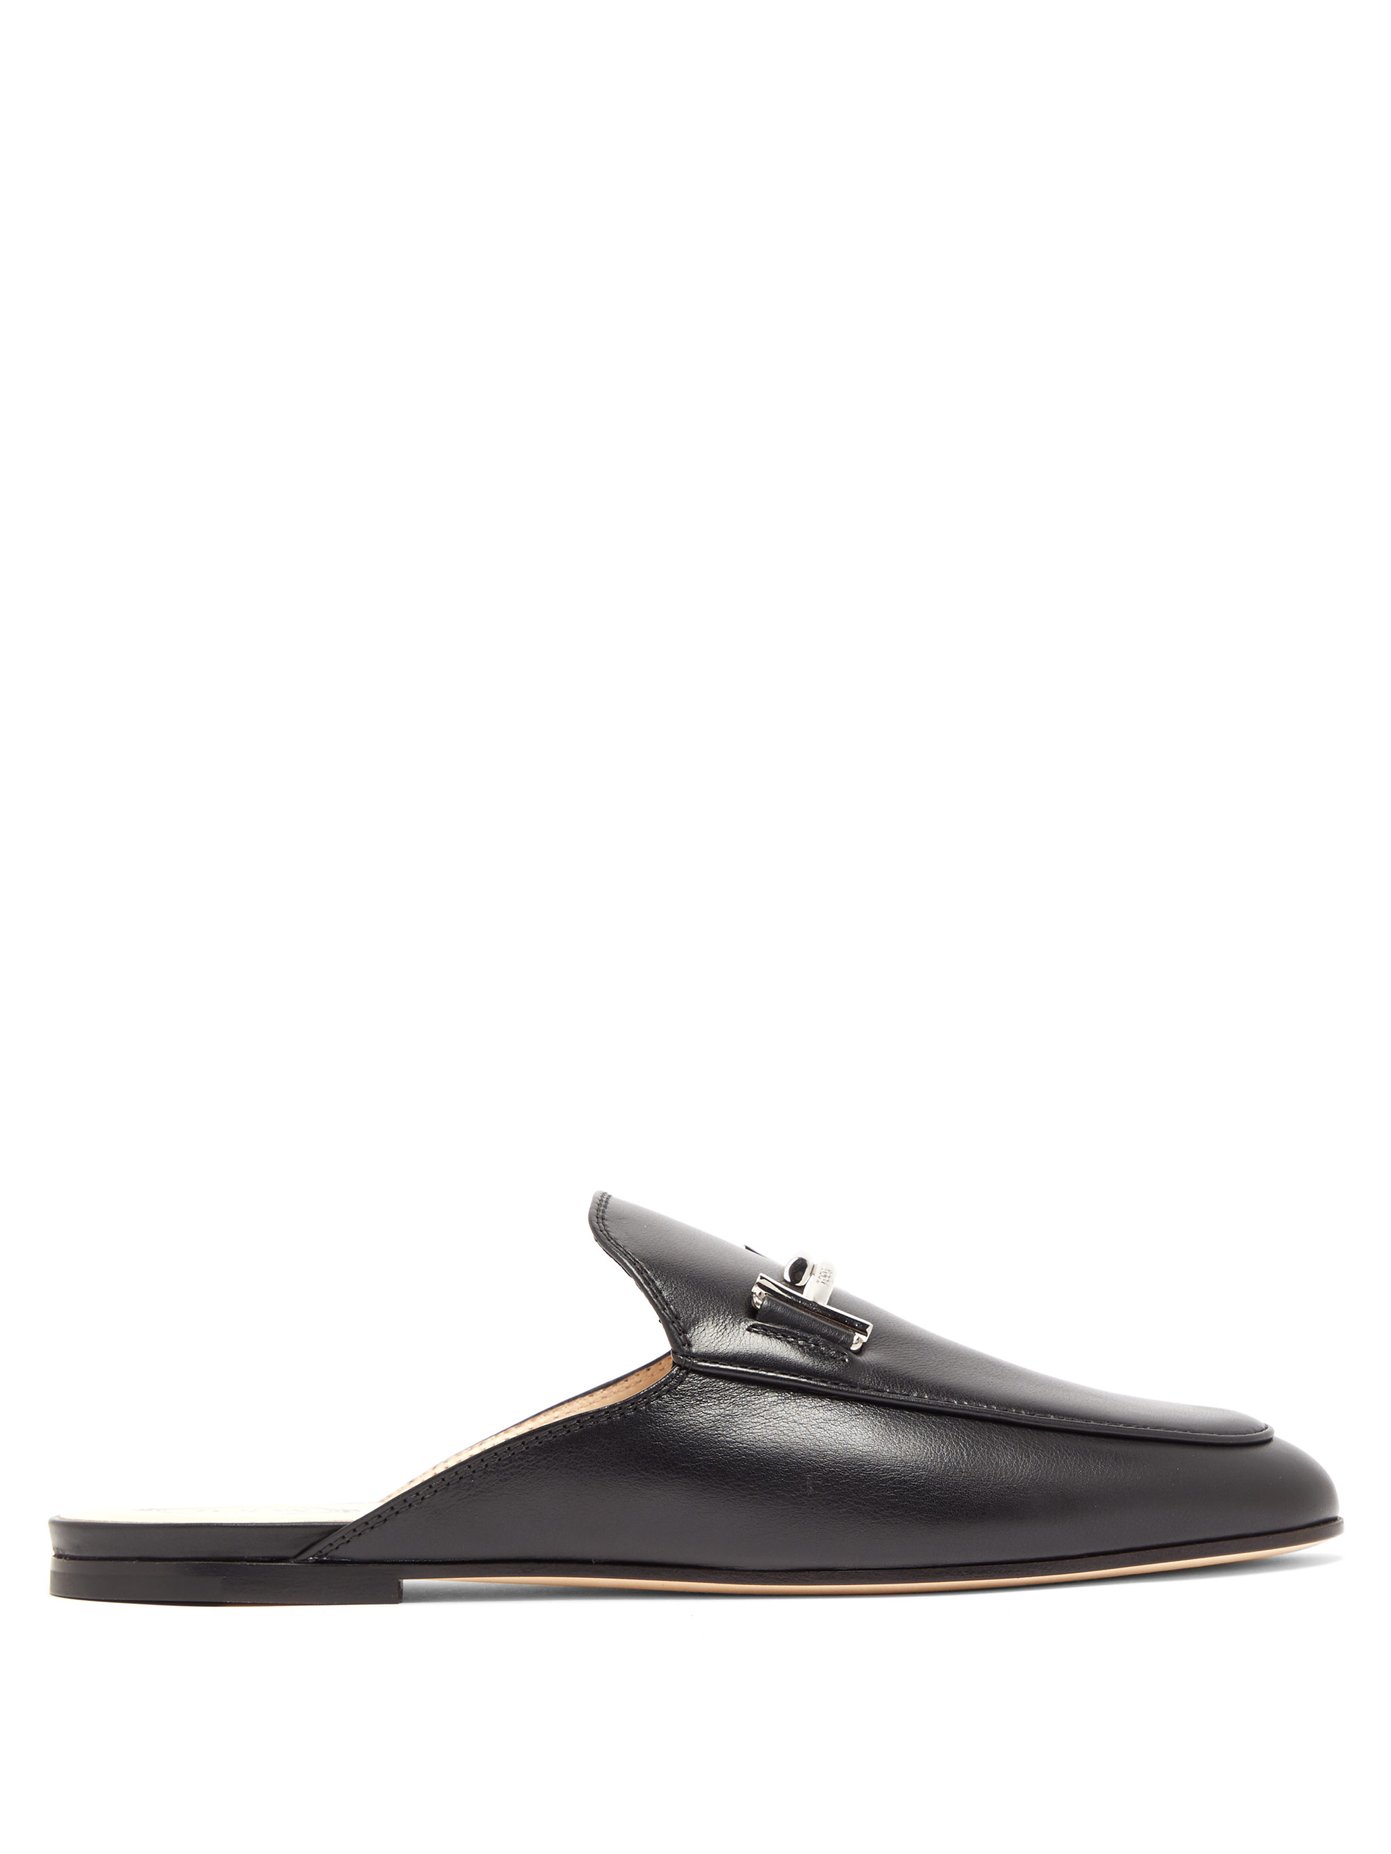 tod's double t loafer womens